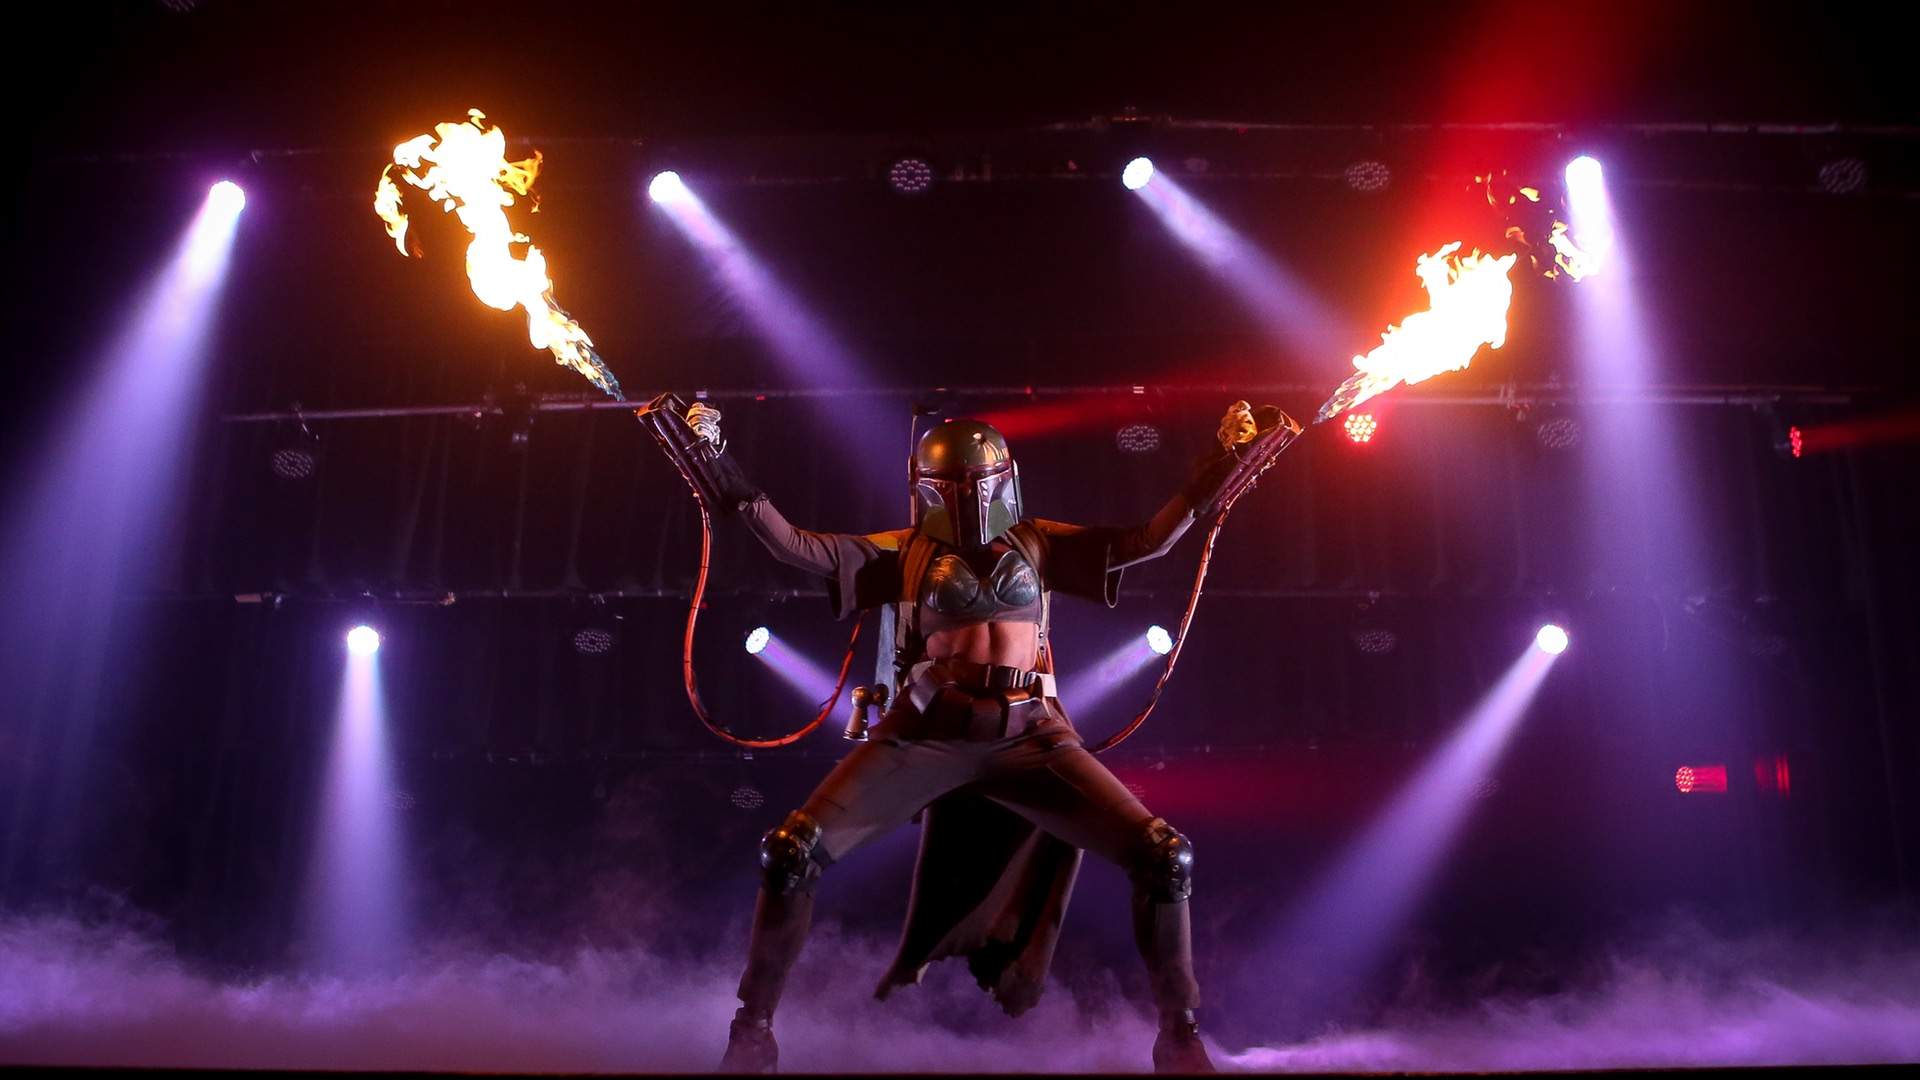 This OTT Burlesque Is the All-Singing All-Stripping Star Wars Show You Never Knew You Needed